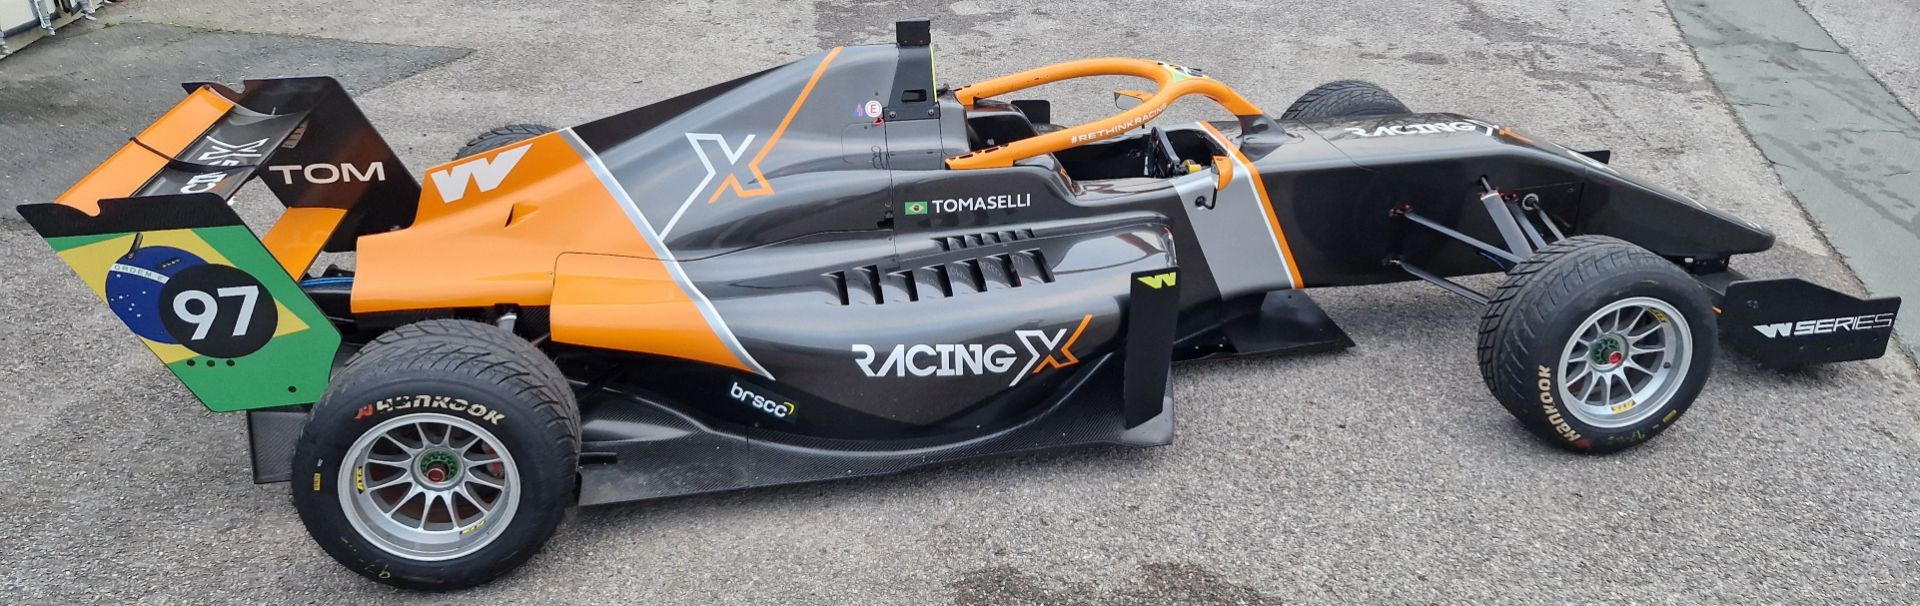 One TATUUS F3 T-318 Alfa Romeo Race Car Chassis No. 063 (2019) Finished in RACING X Livery as Driven - Image 2 of 10